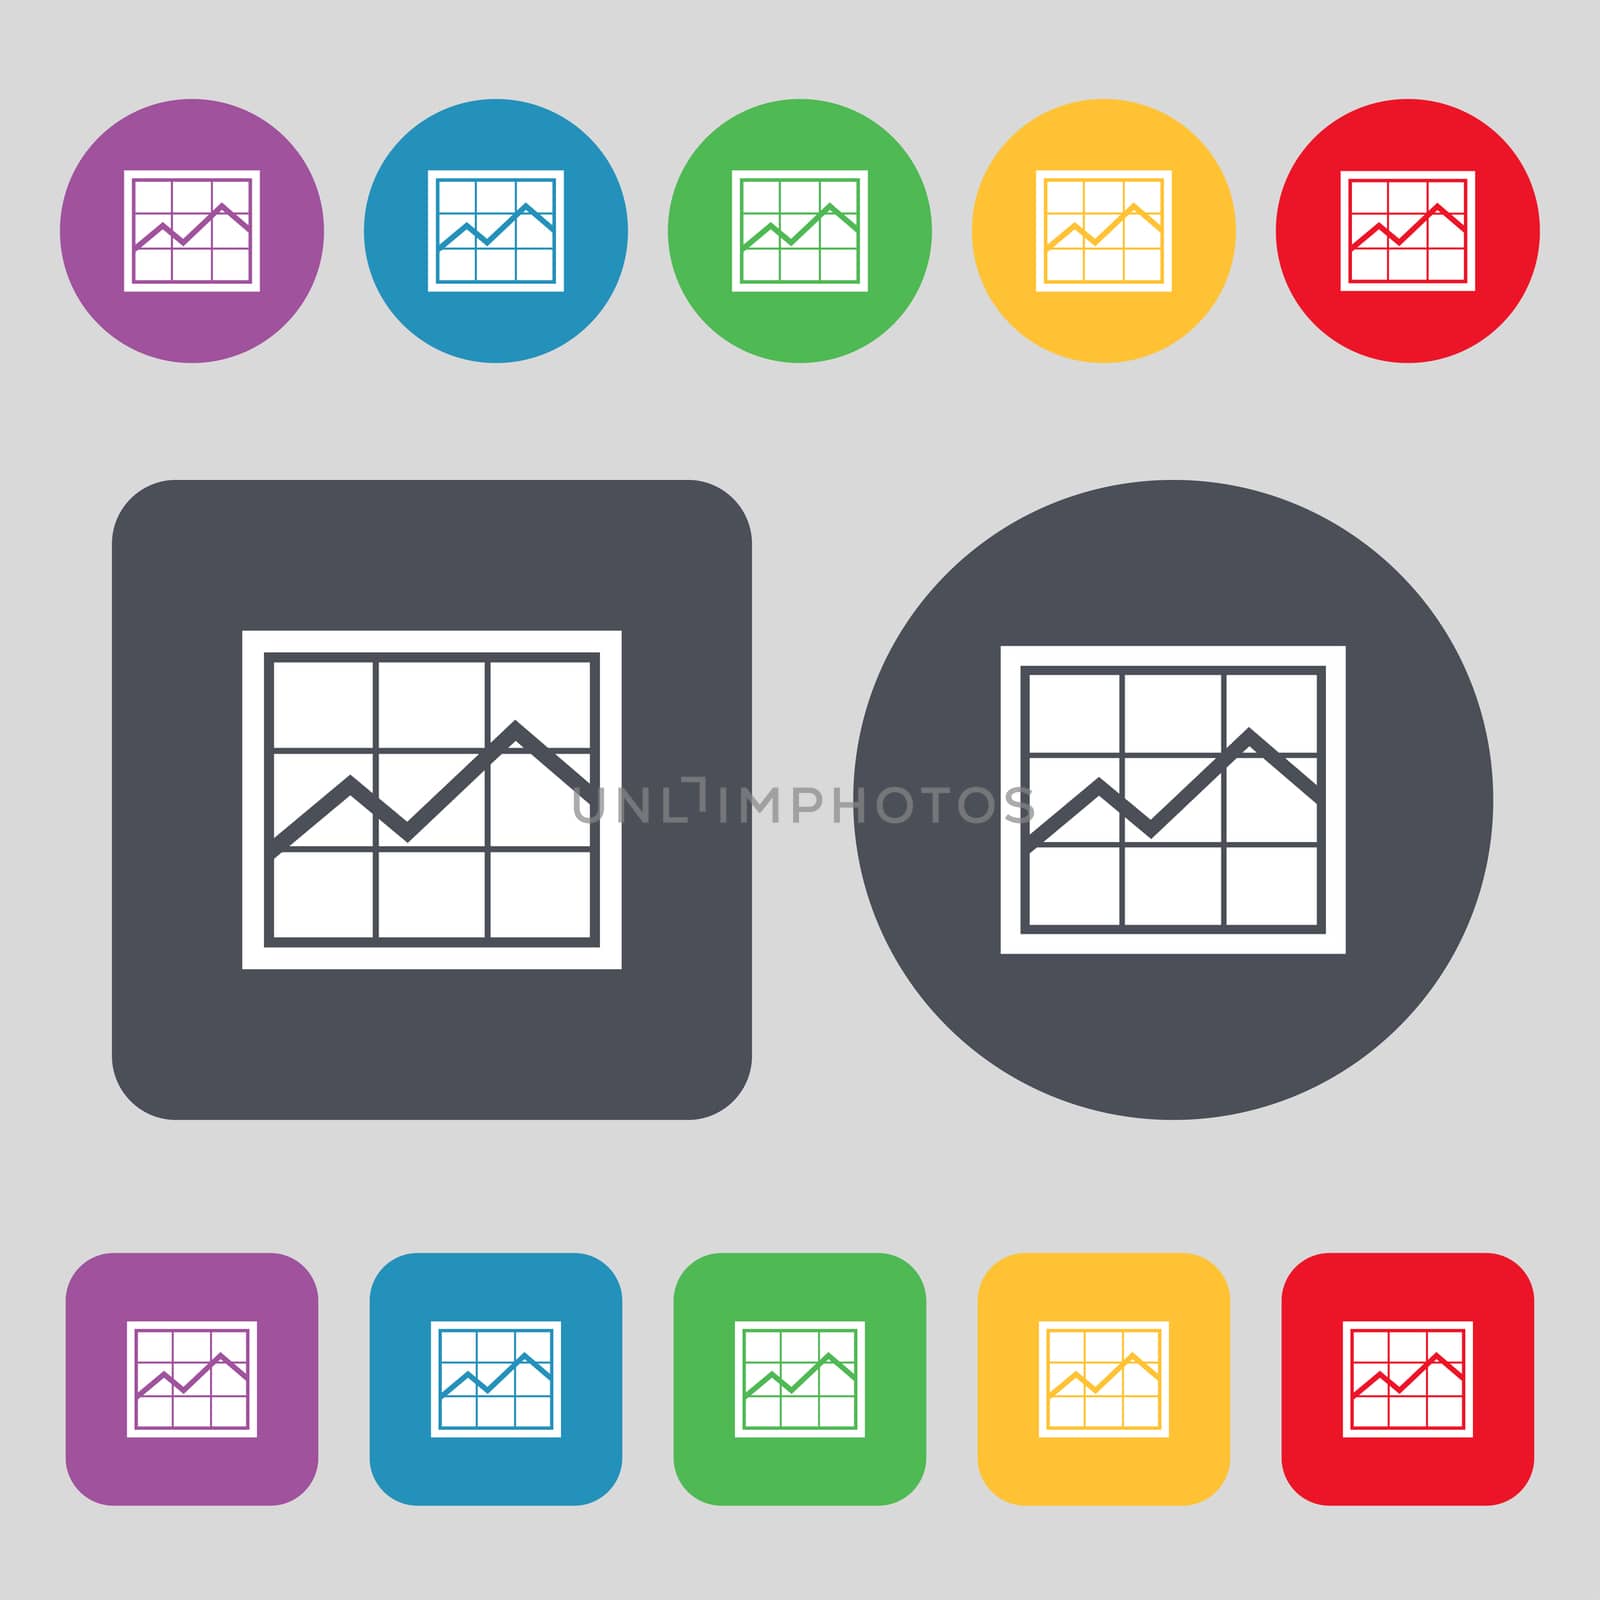 Chart icon sign. A set of 12 colored buttons. Flat design. illustration